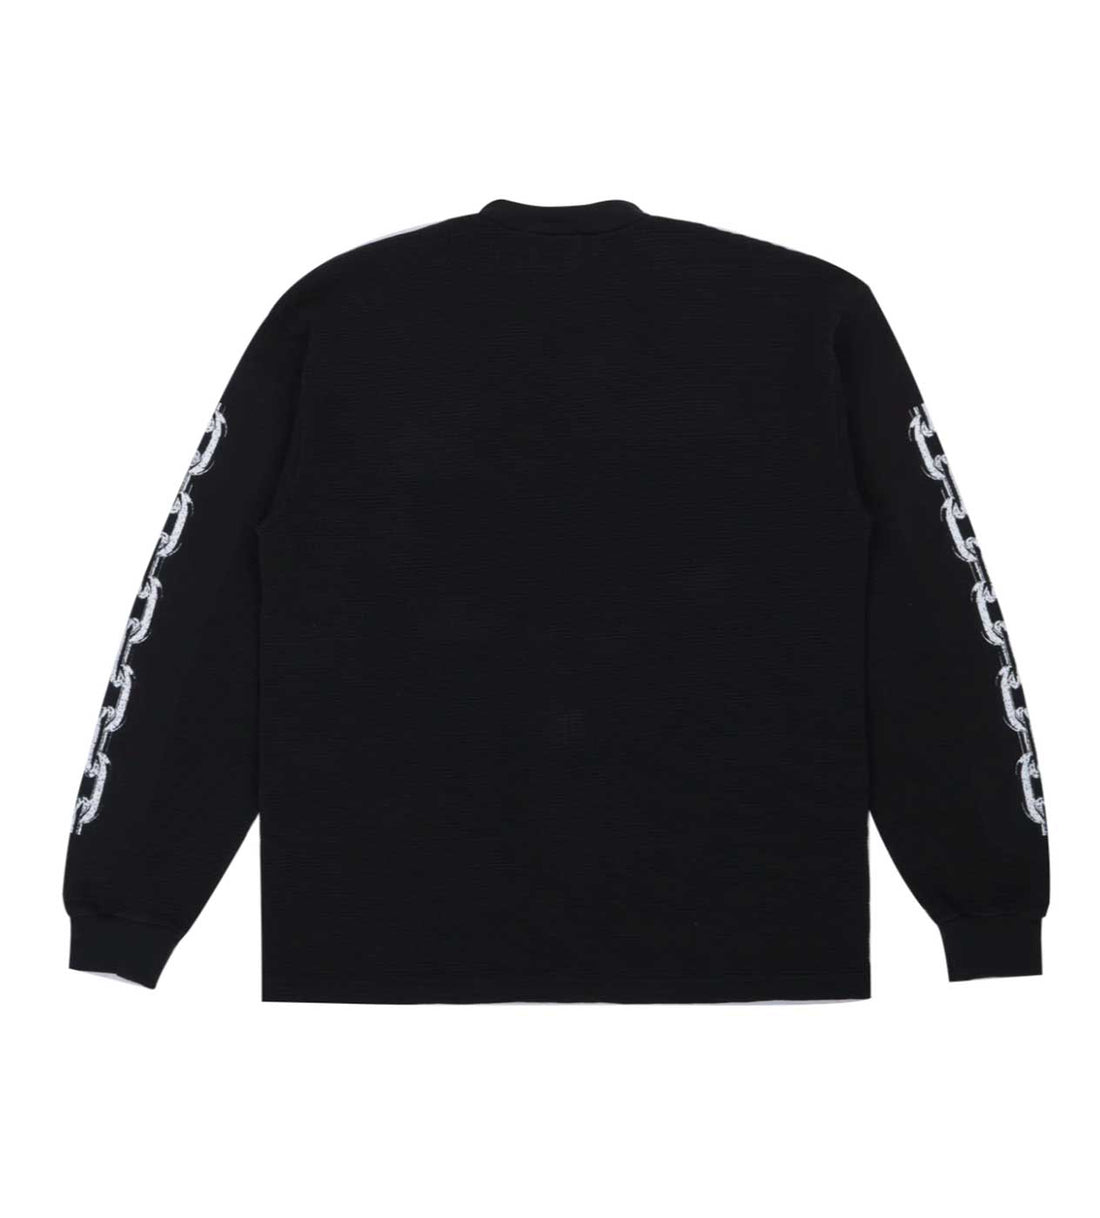 Pieces Hellraisers Thermal Long Sleeve Black Back View